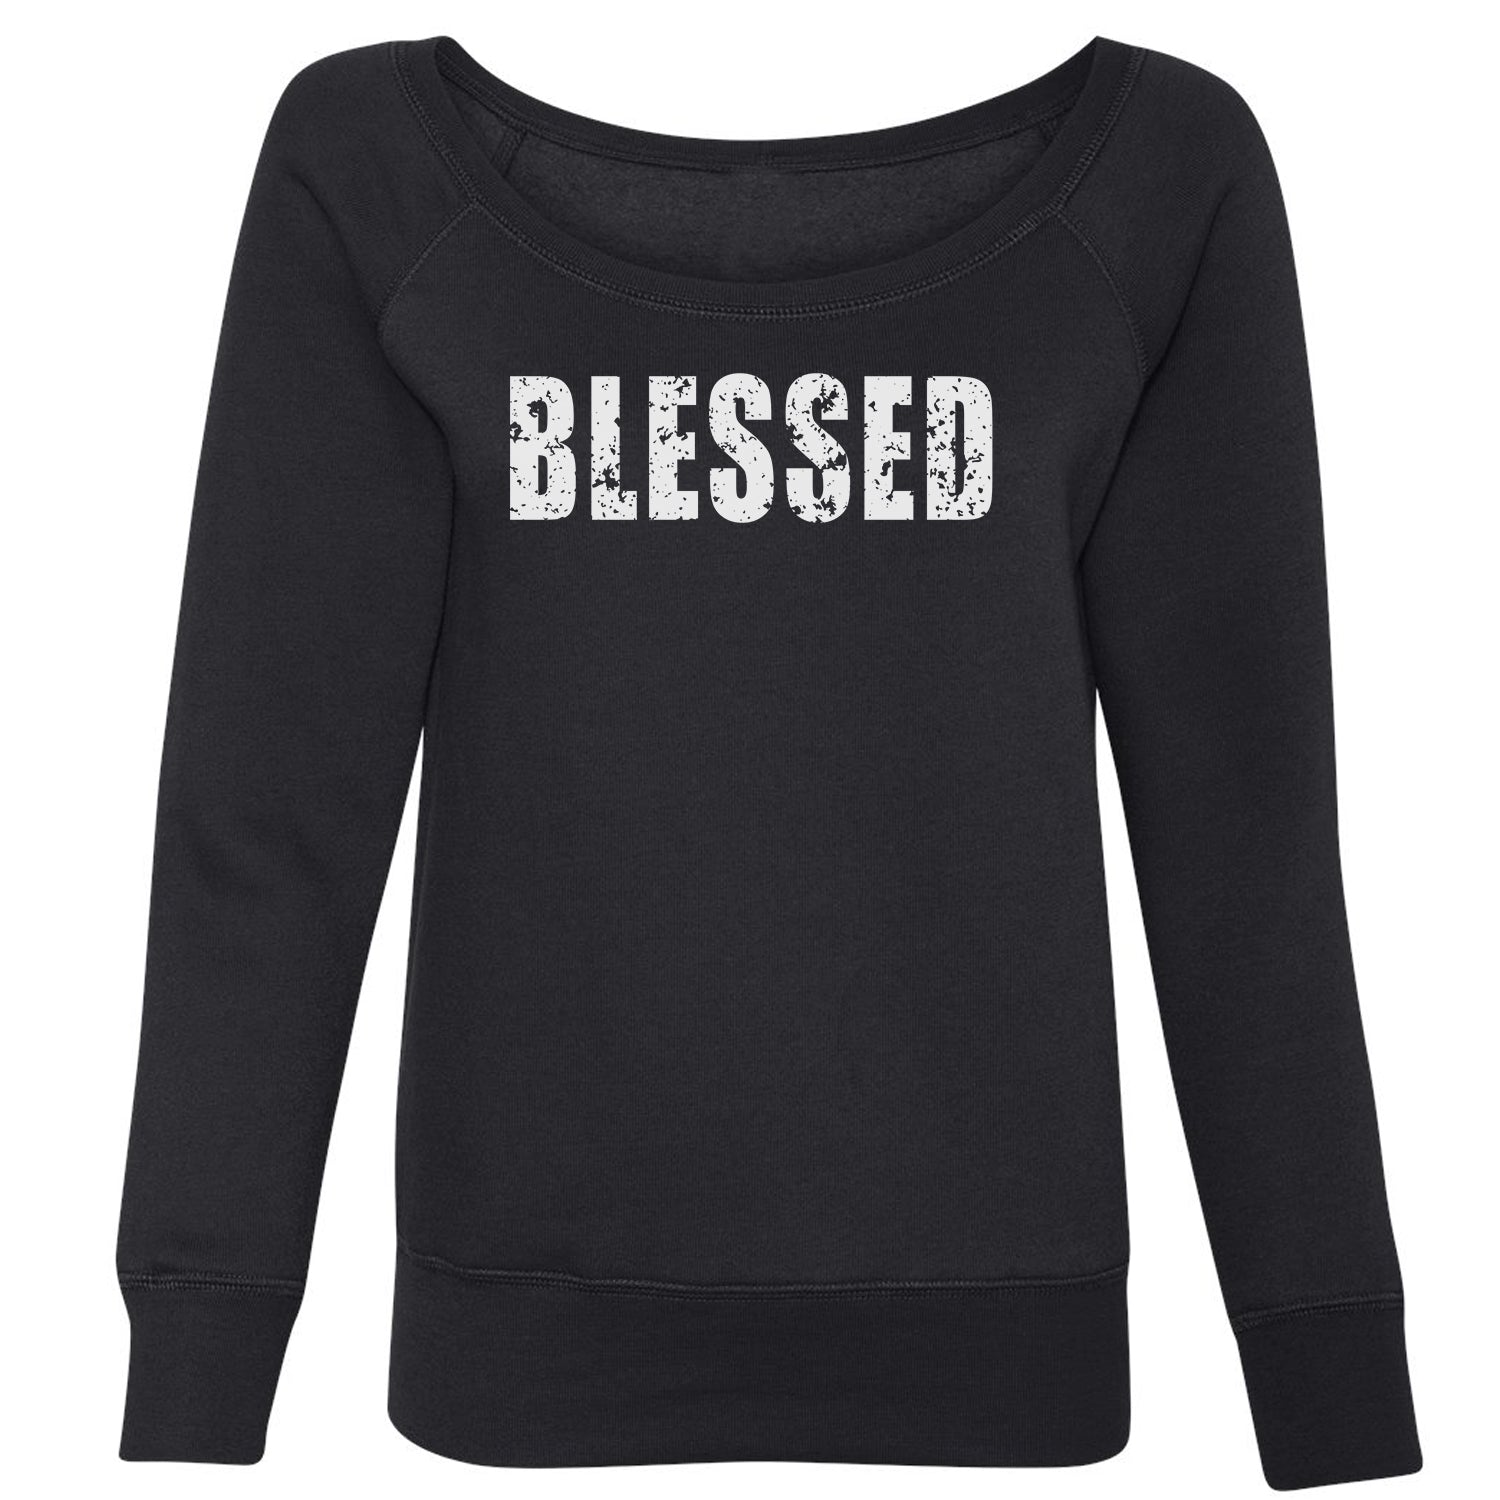 Blessed Religious Grateful Thankful Slouchy Off Shoulder Oversized Sweatshirt #expressiontees by Expression Tees